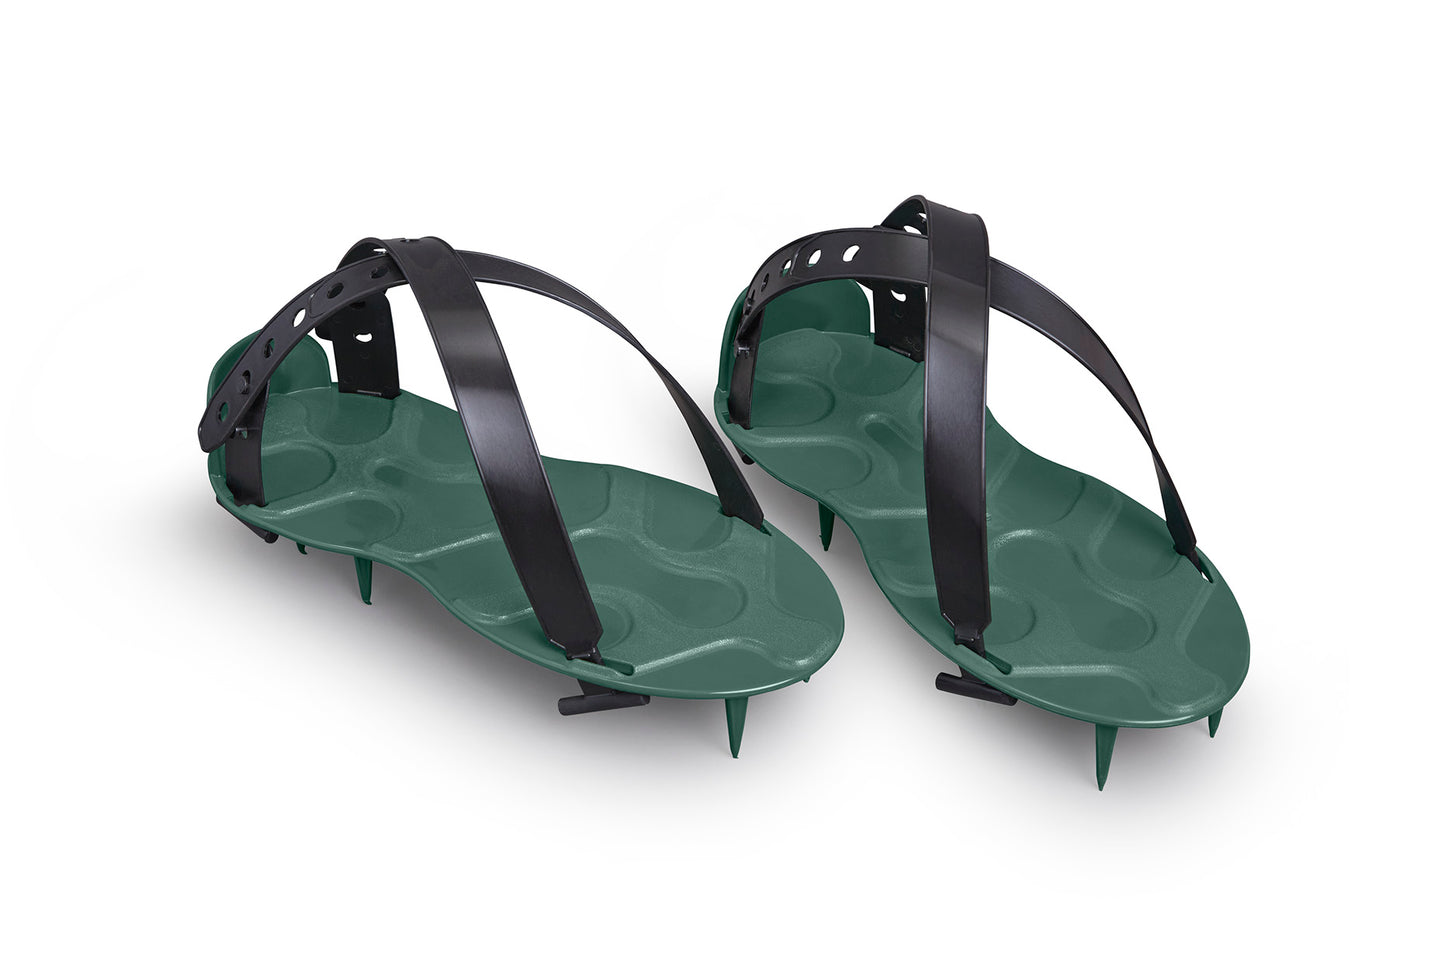 ProSpike Lawn Aerator Shoes with Plastic Straps